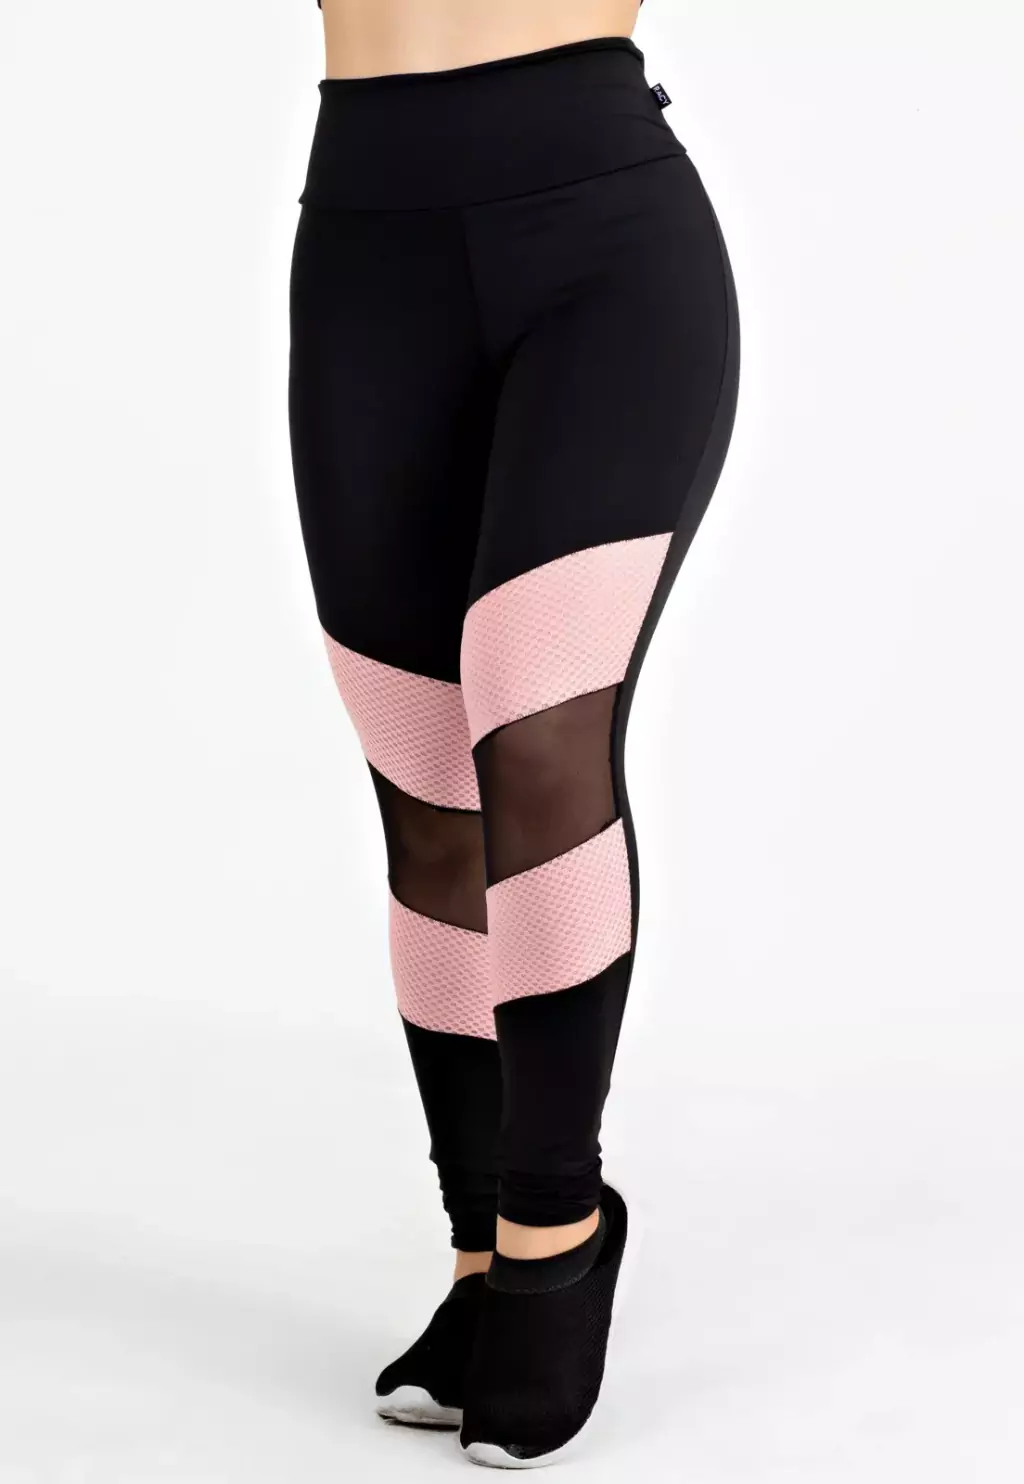 Why do leggings become see-through? - Quora